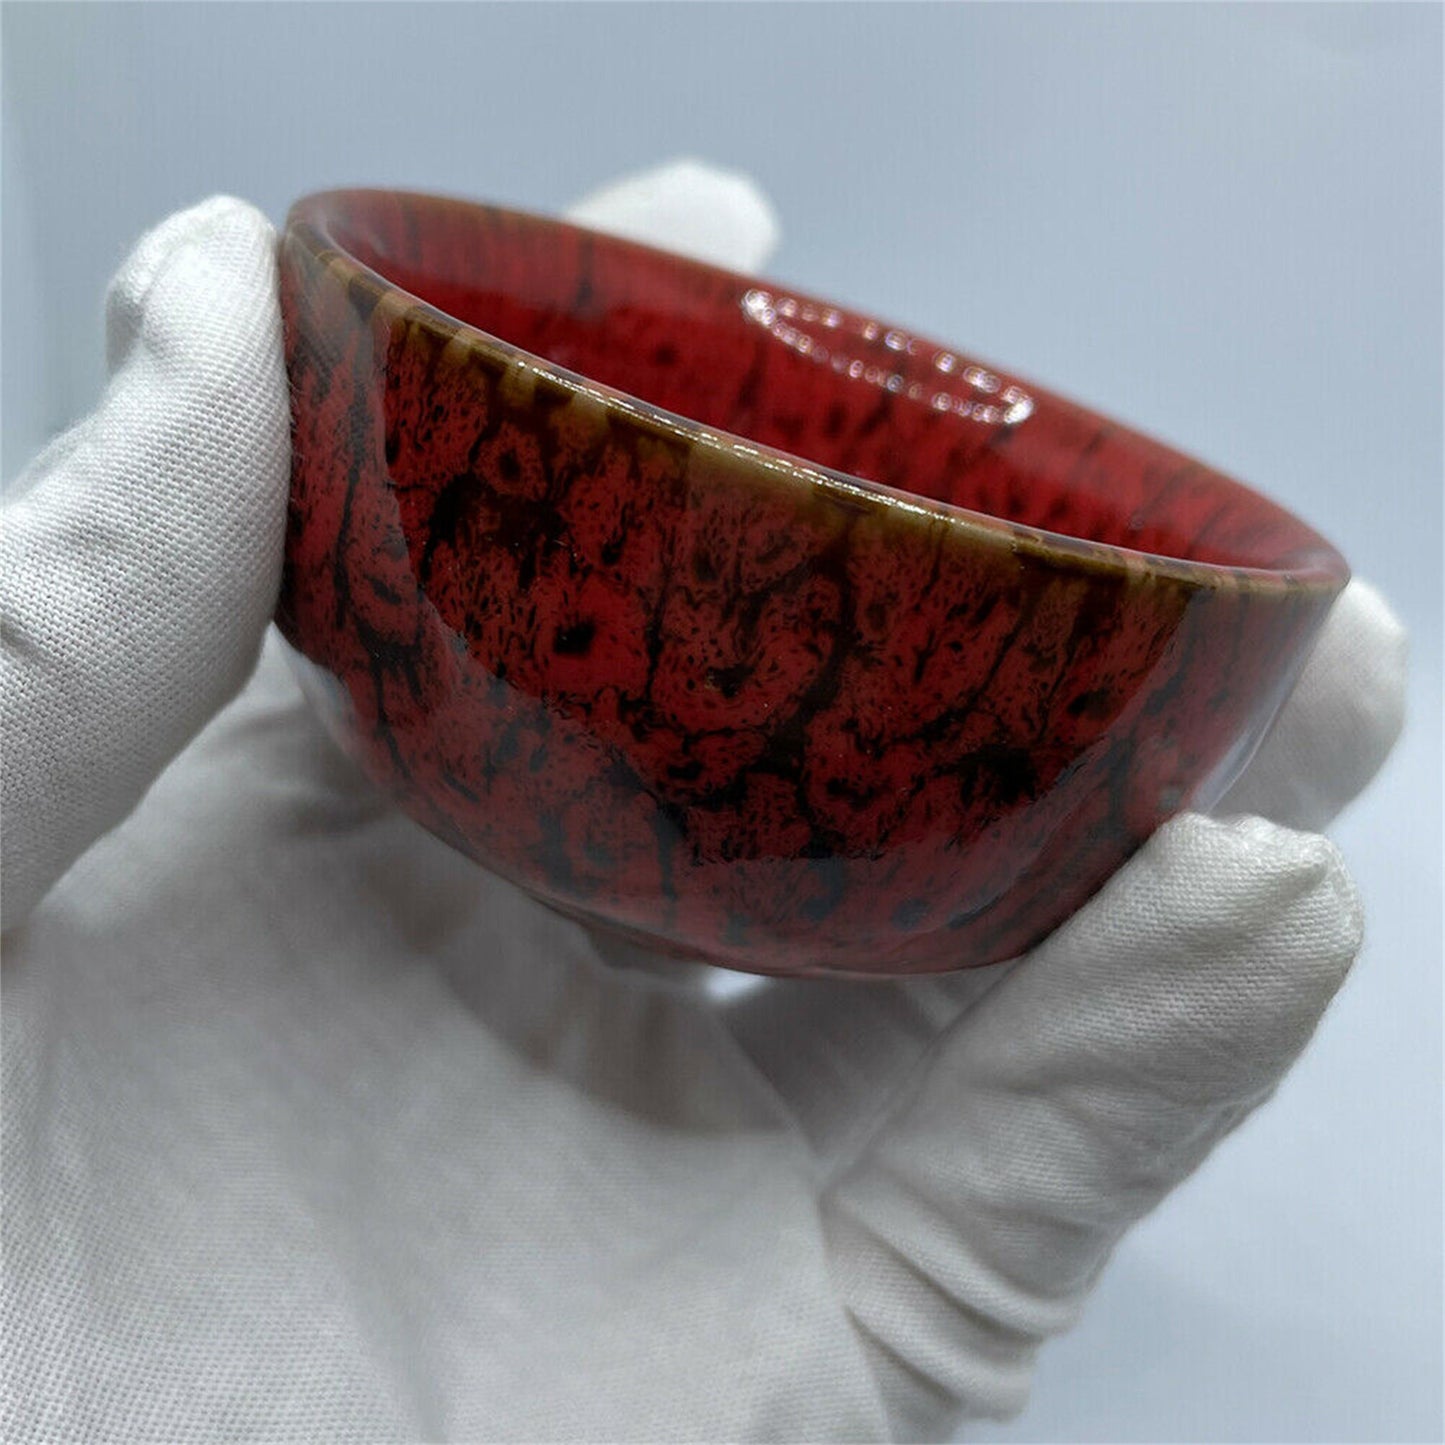 Tenmoku Porcelain Tea Cup, for Chinese Gongfu Chadao, Tea Wares, Tea Sets, Teacup Gifts|Father's Day Gift